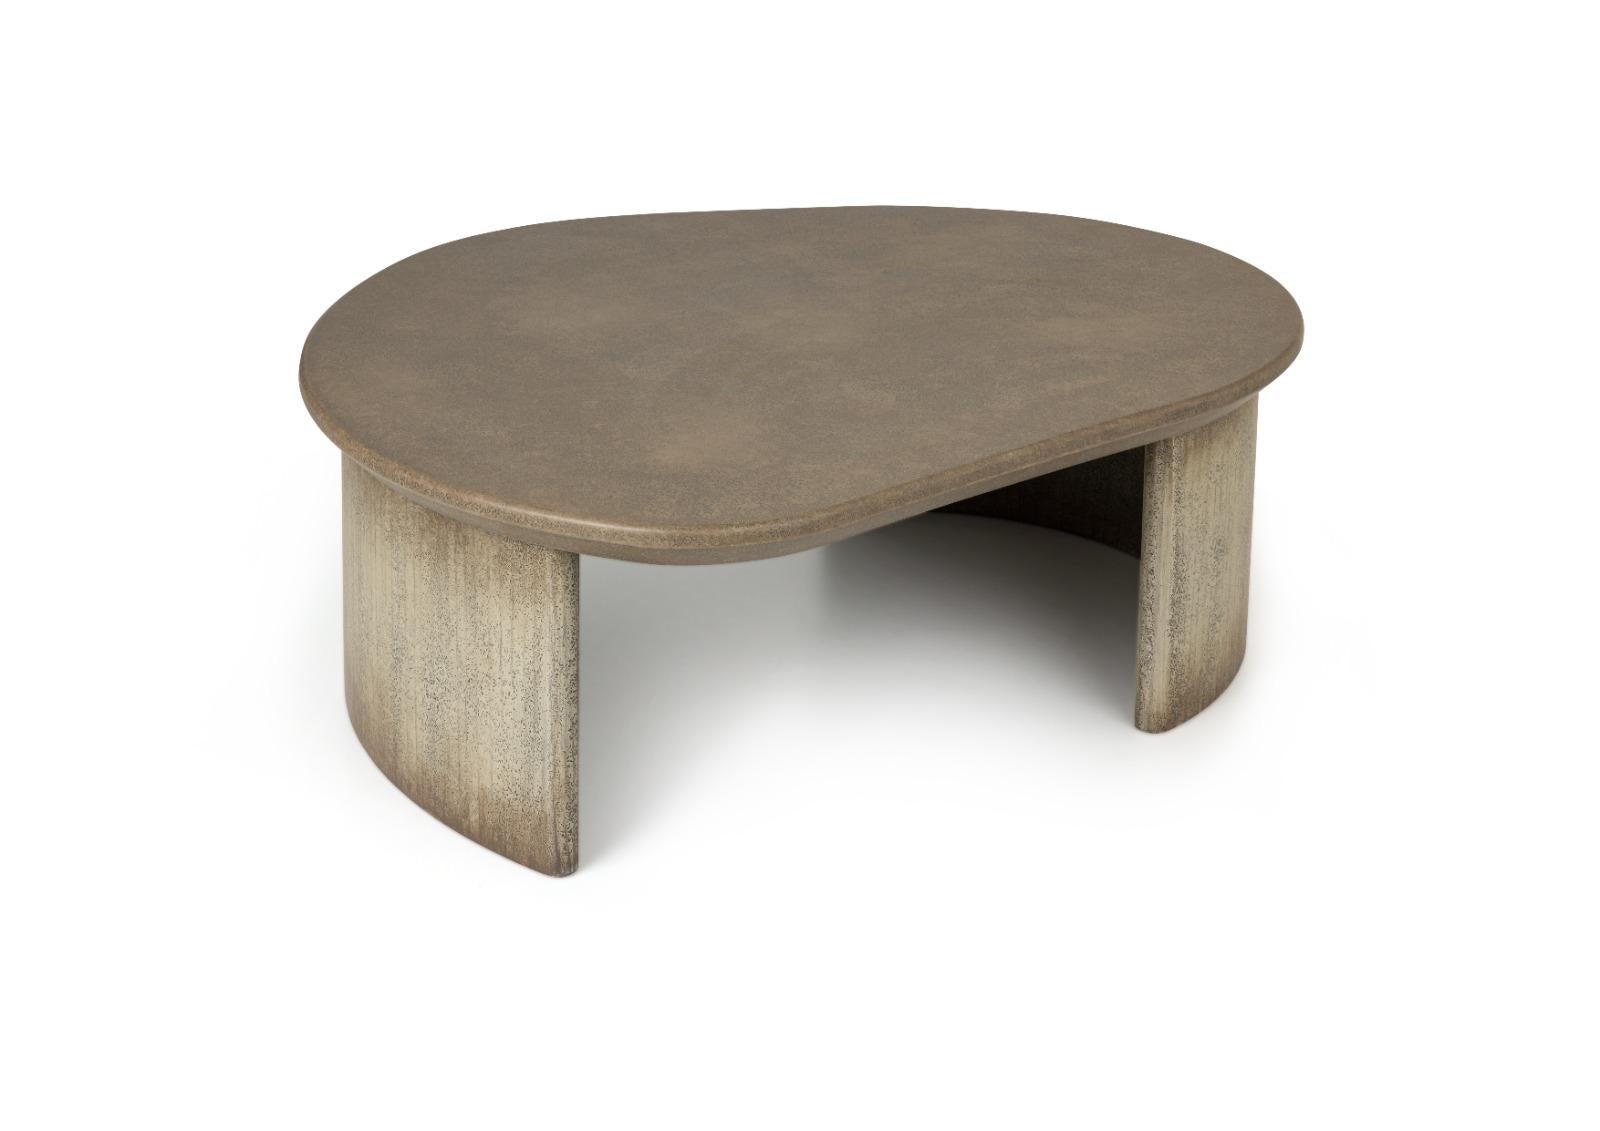 European Coffee Table, Lacquered Wood in Handmade Textured Finish, Amorphous  For Sale